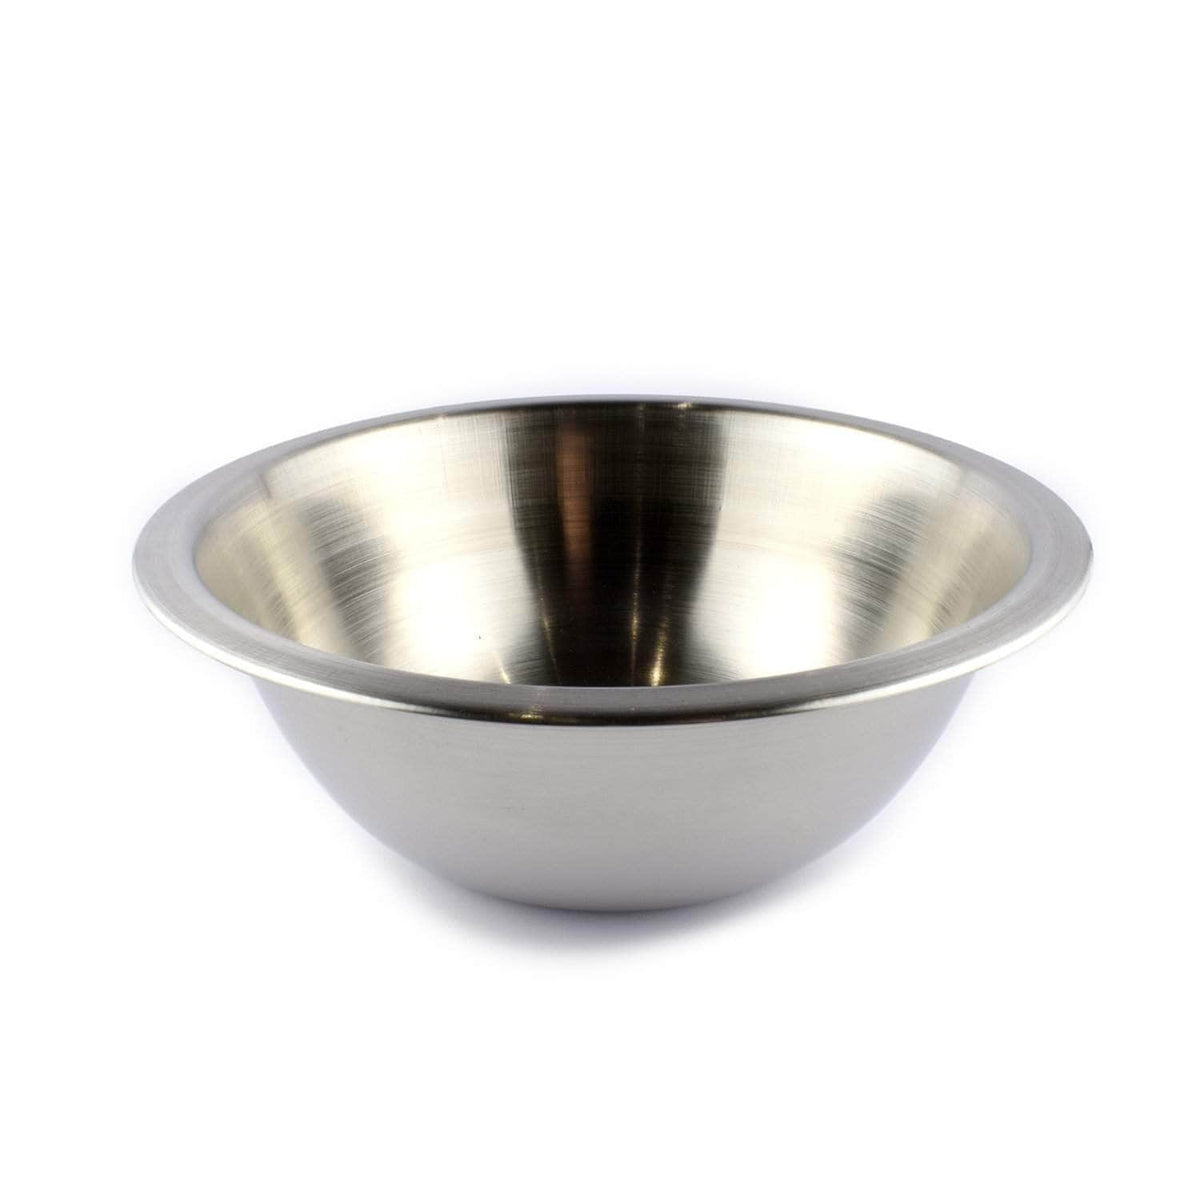 Stainless steel mixing bowl 1 litre